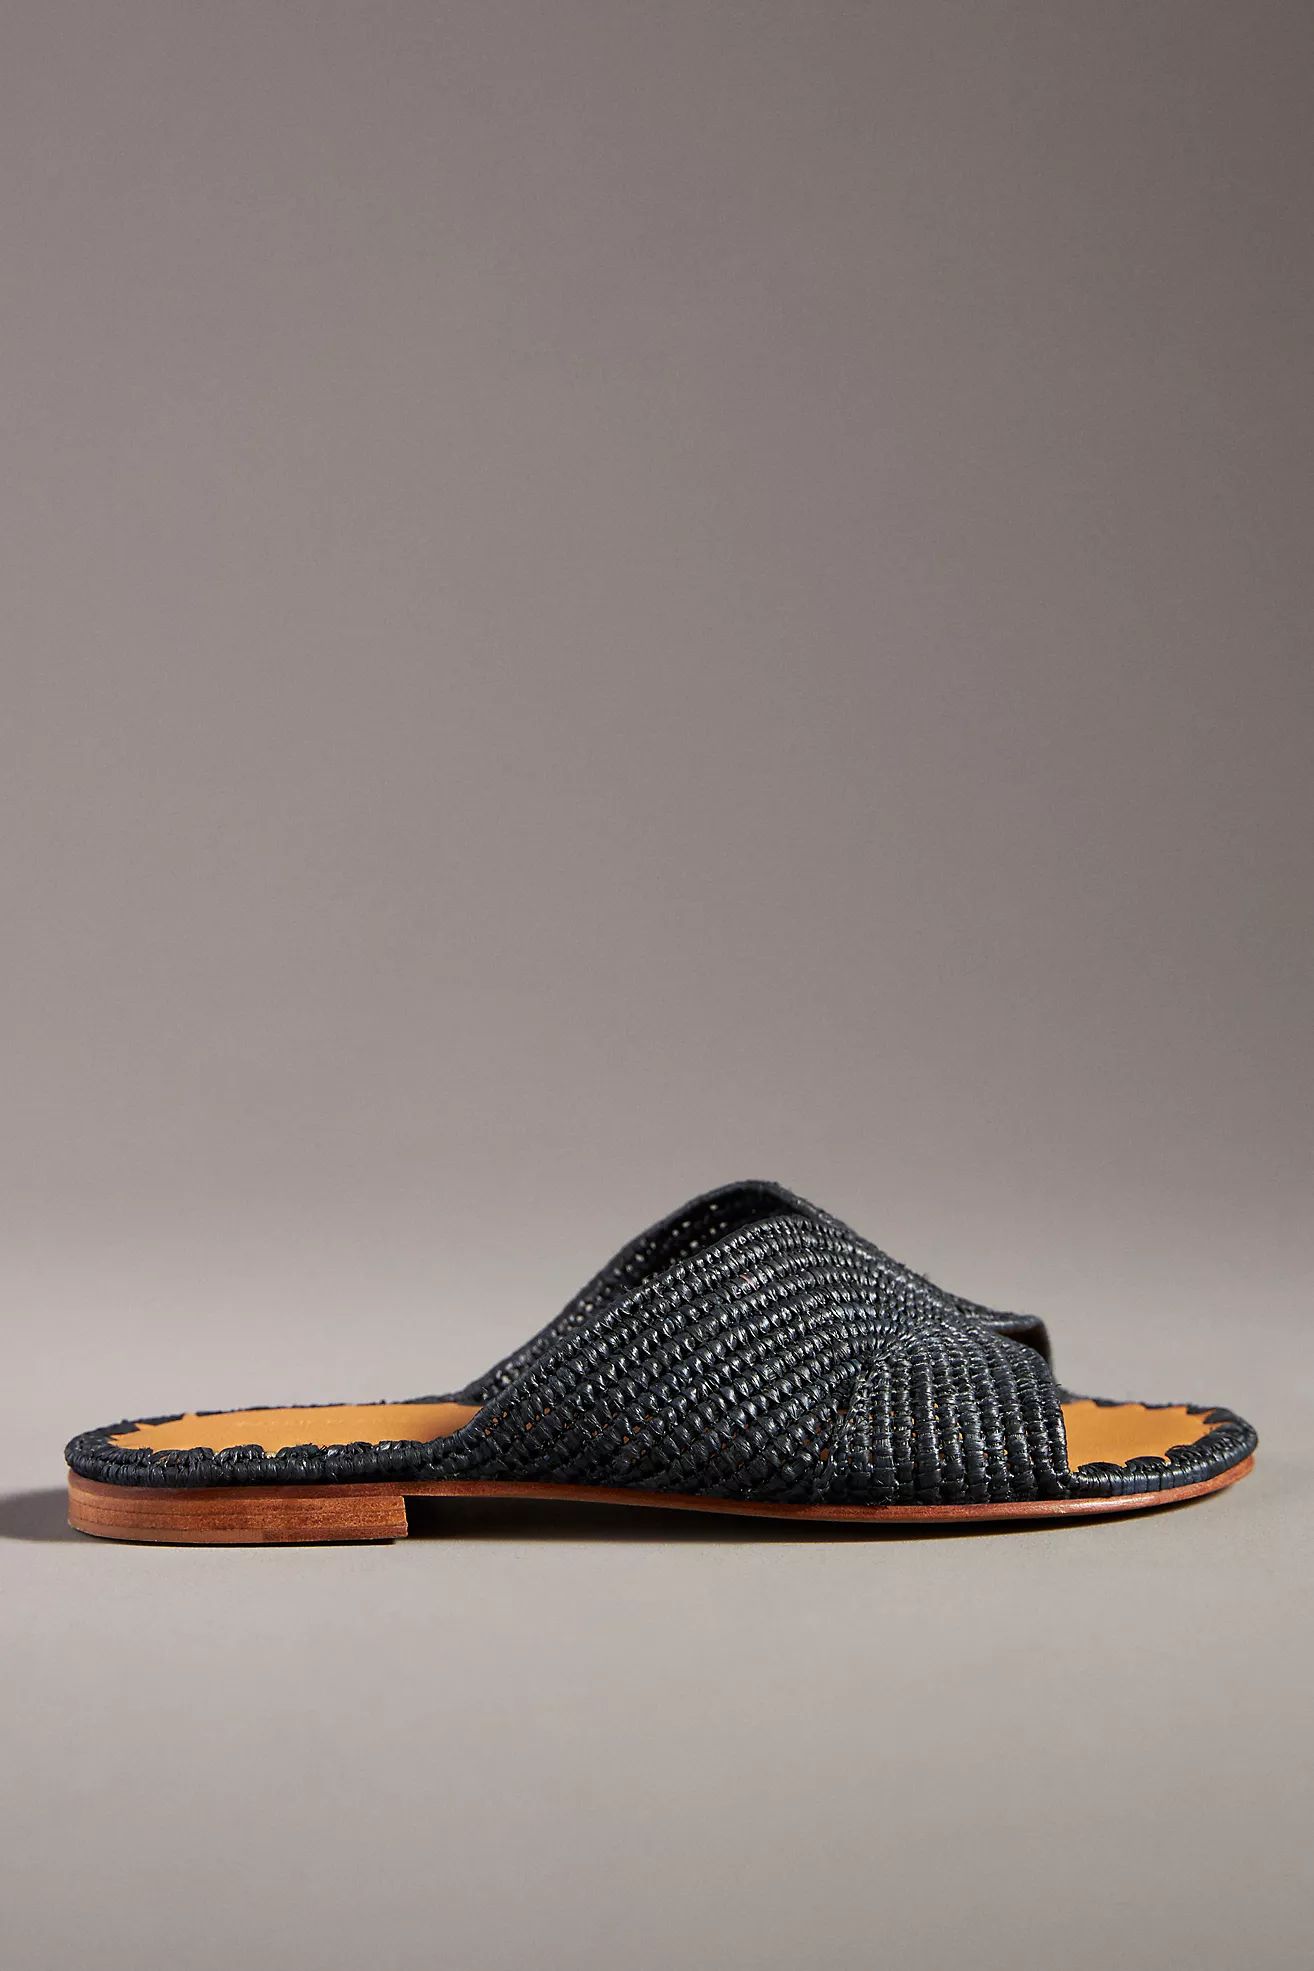 Carrie Forbes Salon Woven Slide Sandals | Anthropologie (US)